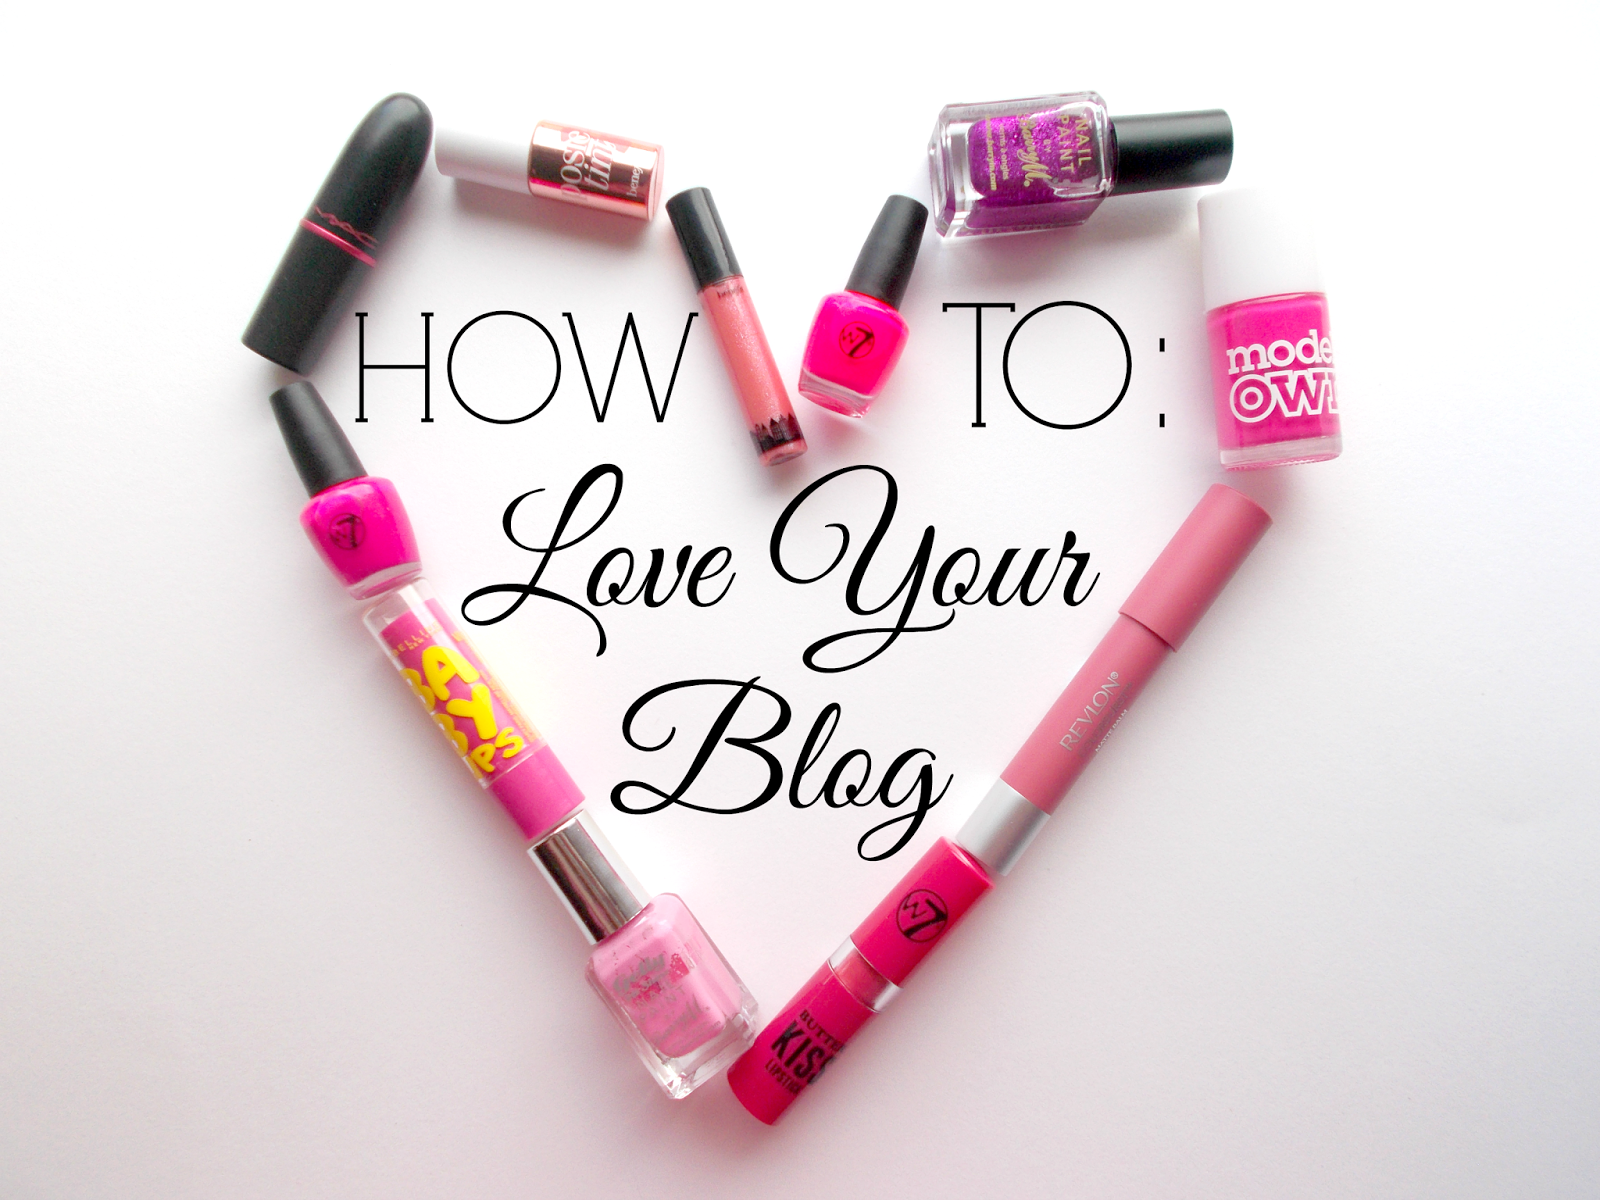 how to love your blog blogging advice tips positivity